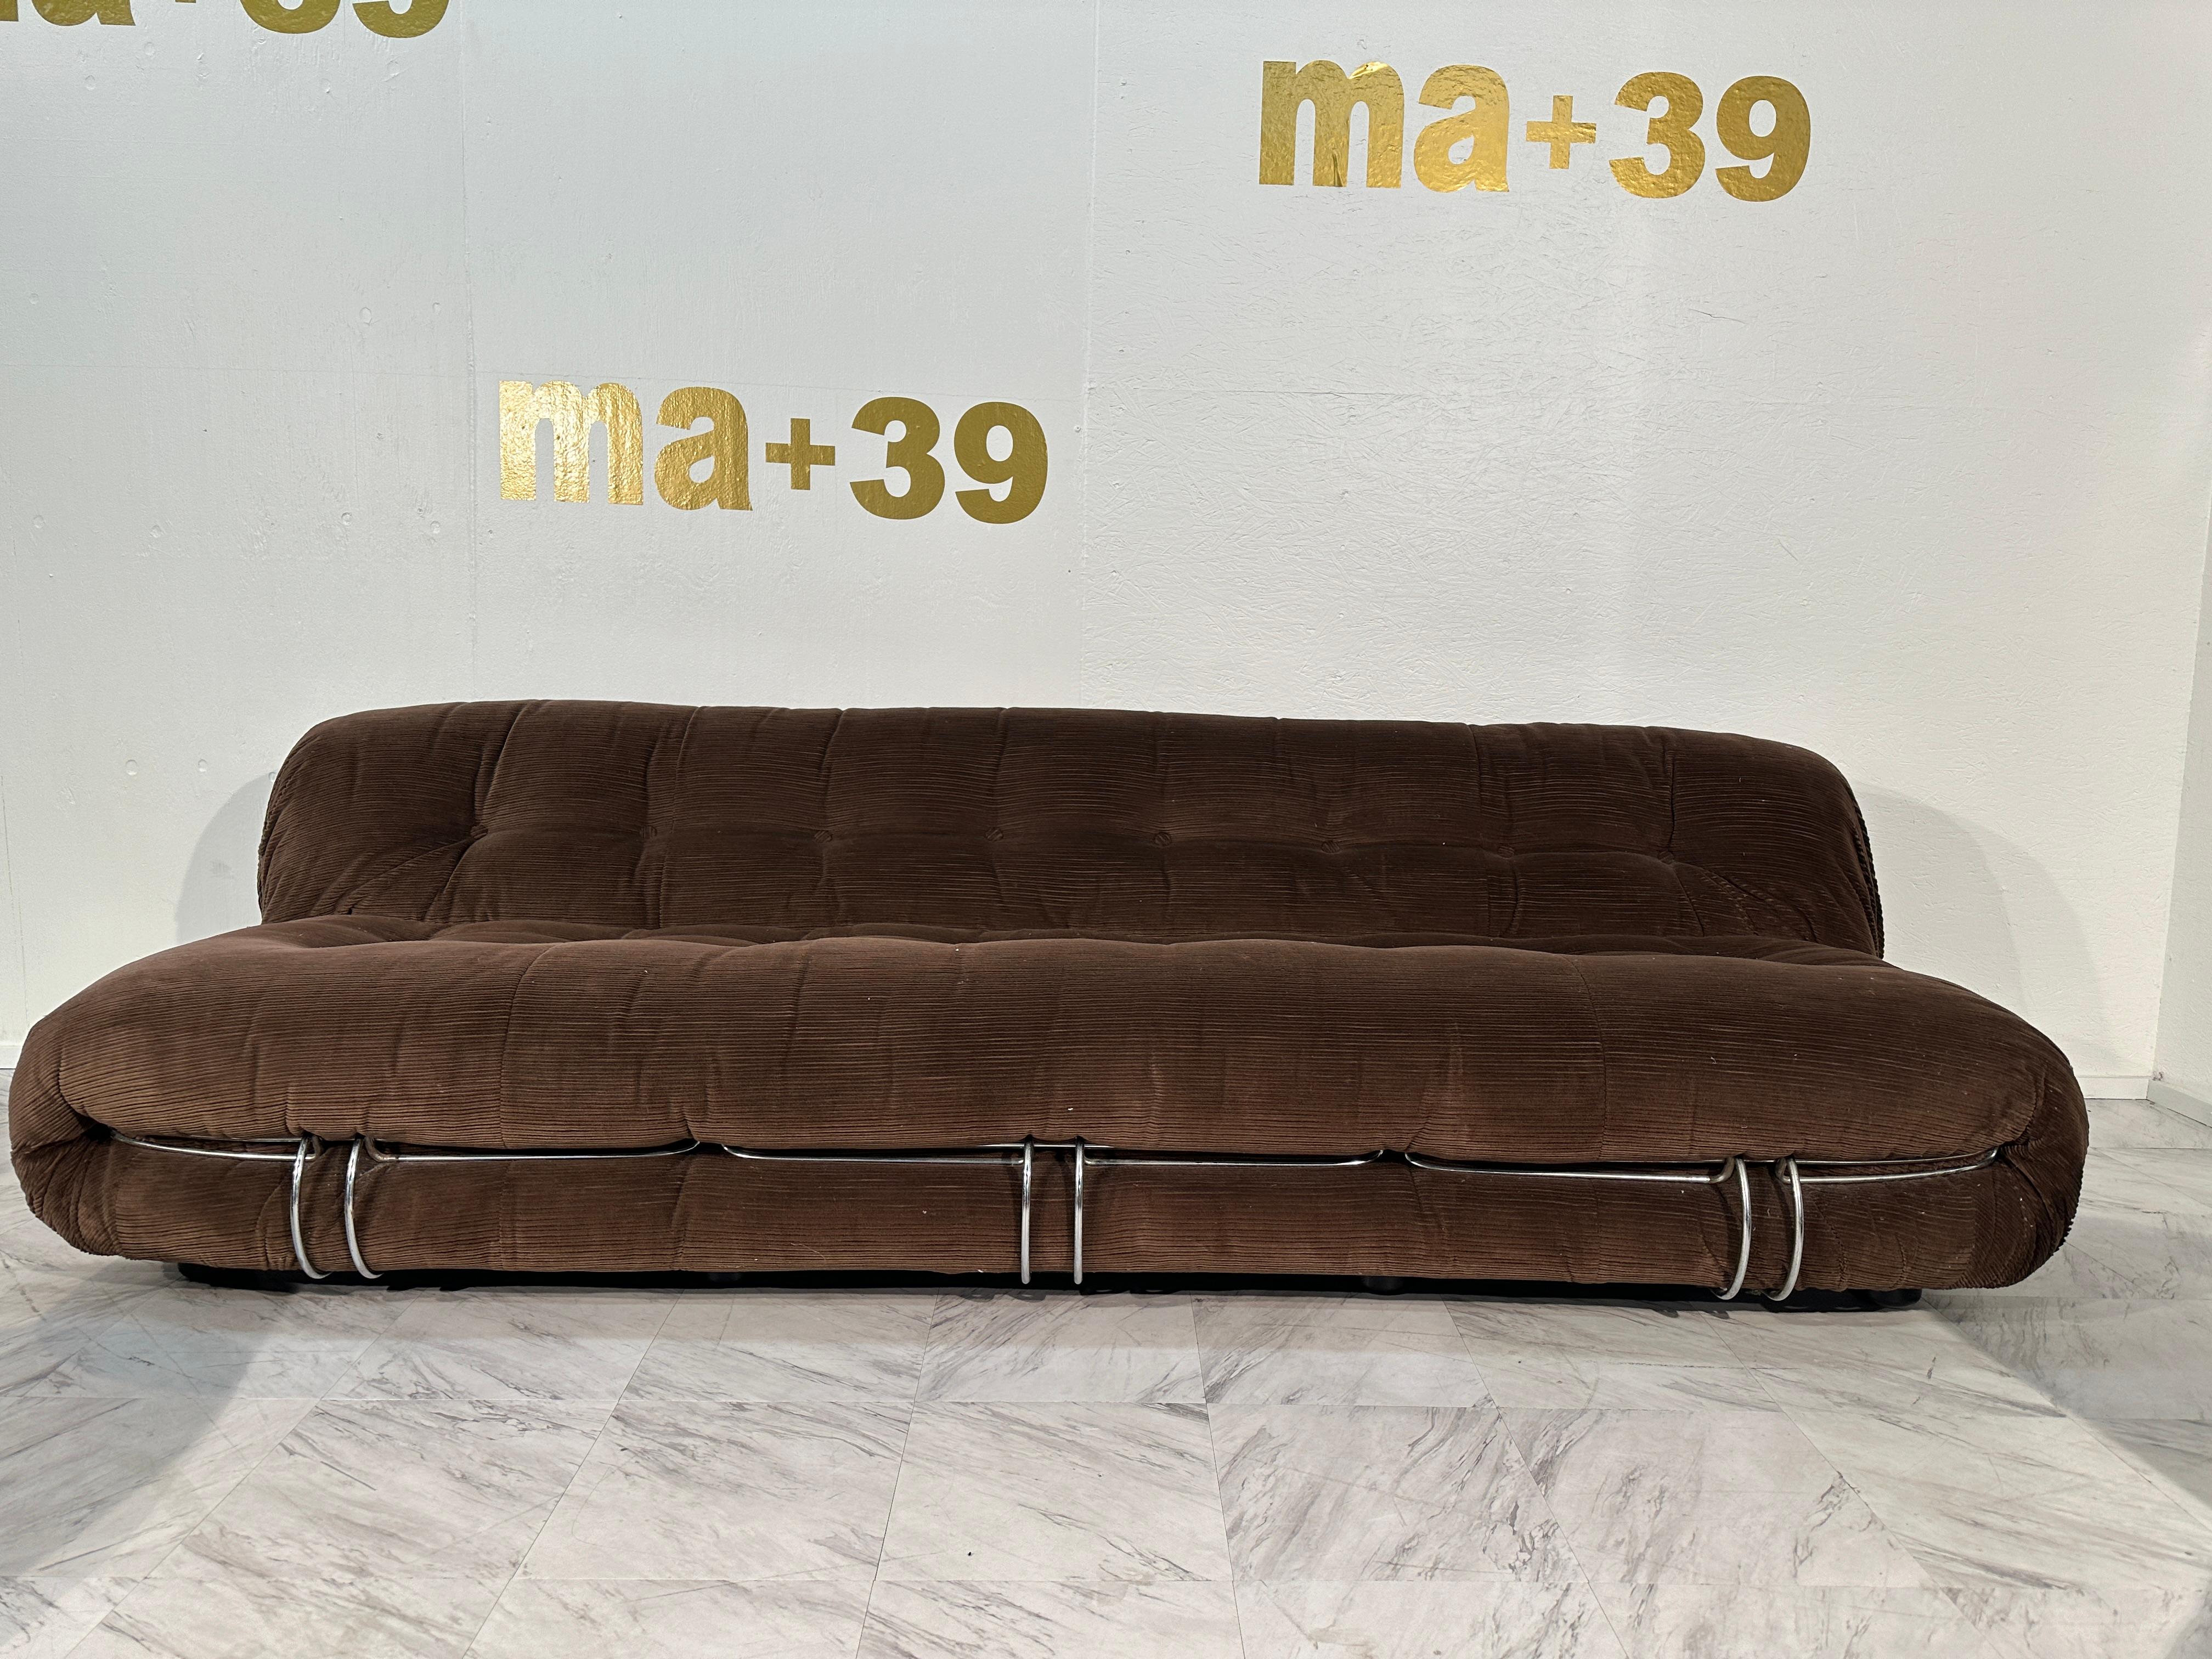 “Soriana” three seat velvet sofa by Afra and Tobia Scarpa from Italy, 1969. The Post-Modern sofa was manufactured by Cassina and features three front metal clamps. The Soriana collection was meant to express beauty and comfort by using a whole